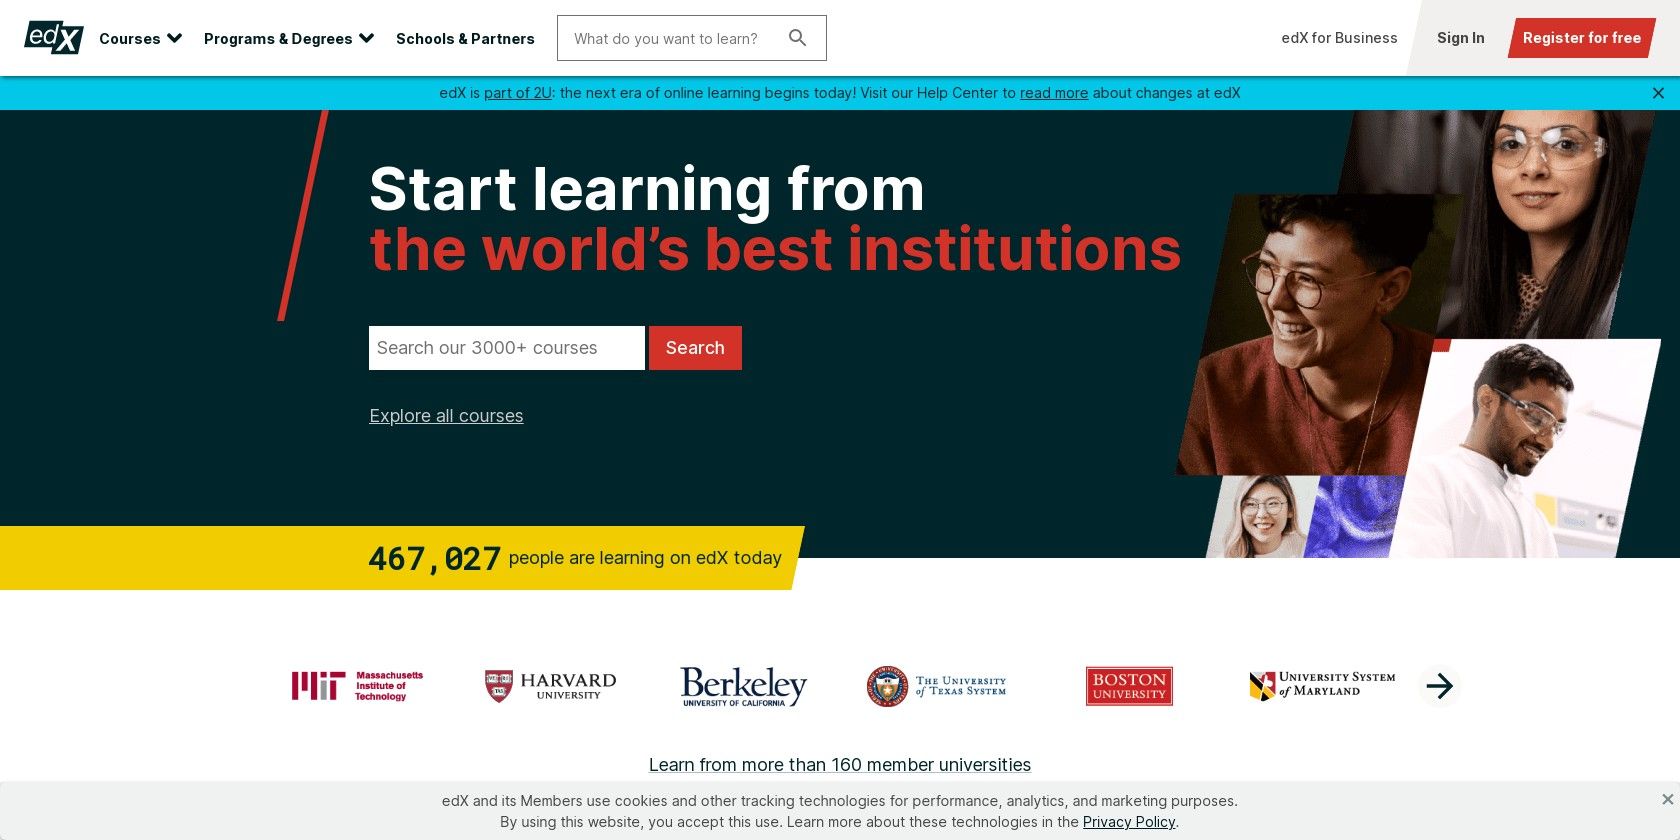 edX_free Online Courses by Harvard